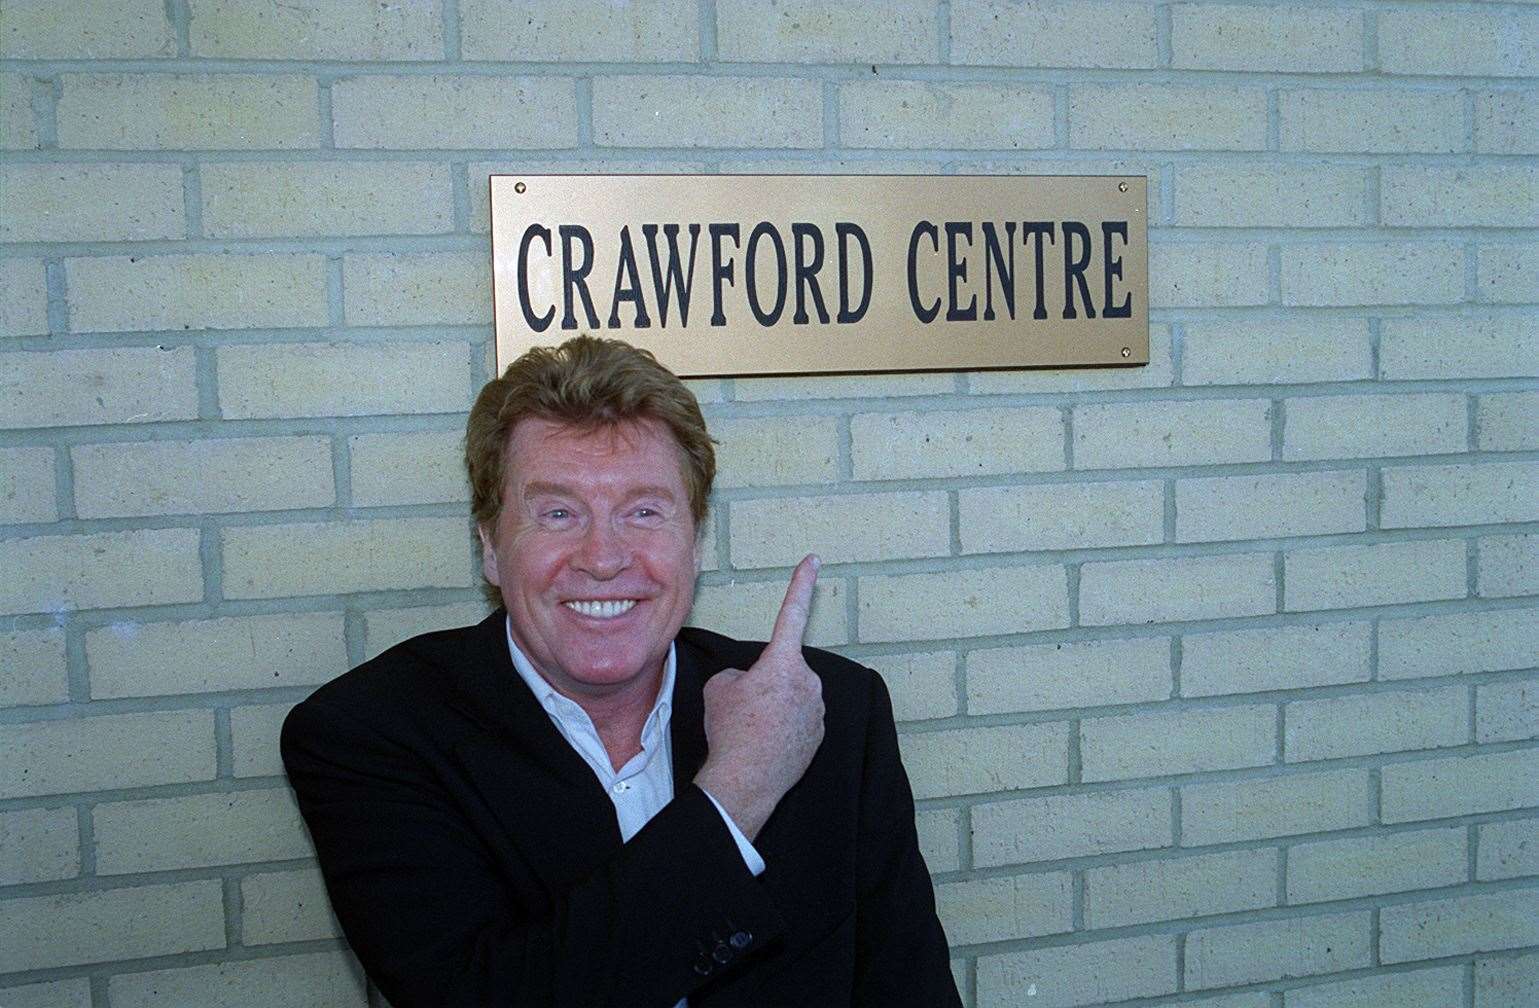 Michael Crawford couldn't resist a laugh when he opened the Crawford Centre in Sheerness on November 5, 2001